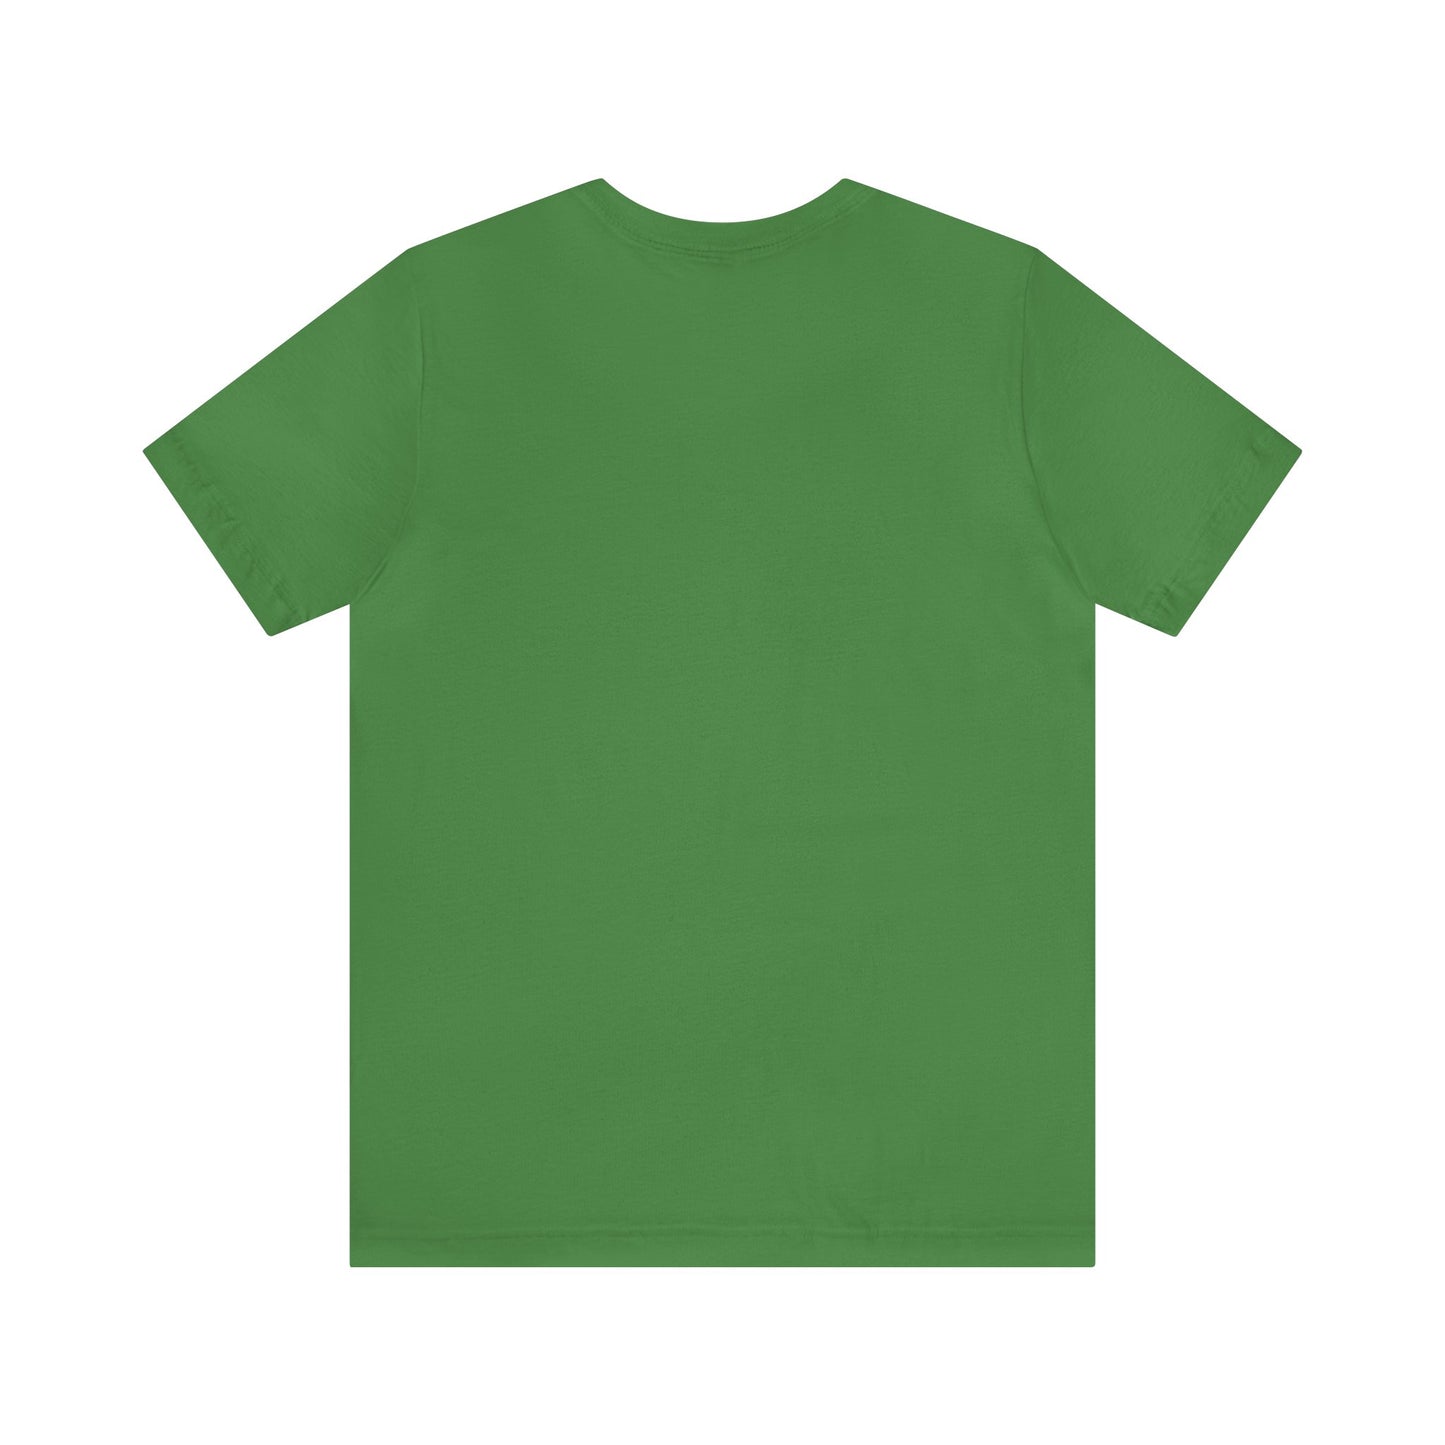 Founding Father's of St. Patrick's Day Men's Tee